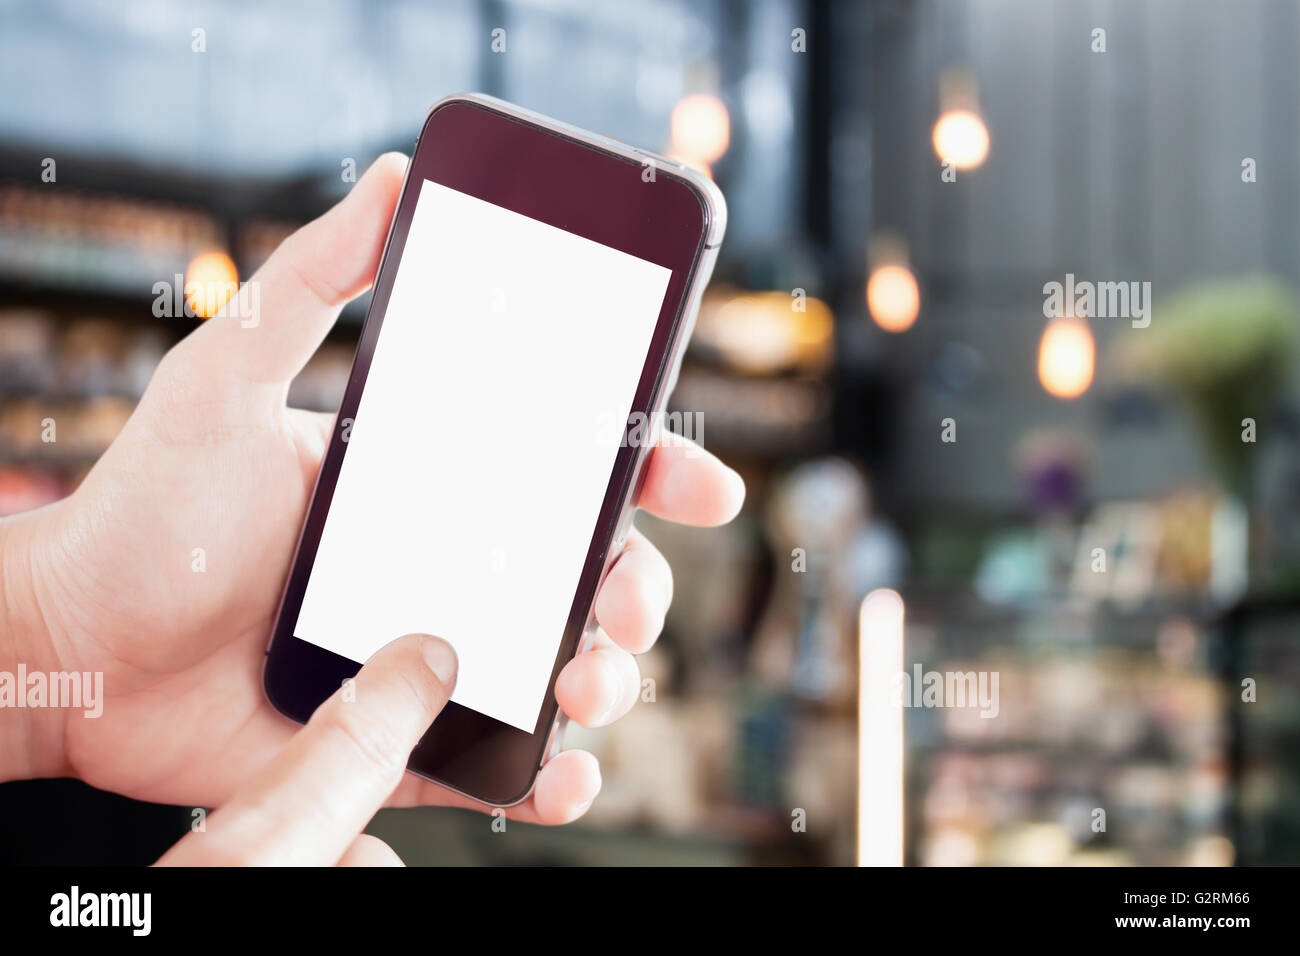 Hand holding blank screen mobile phone with blur coffee shop background Stock Photo